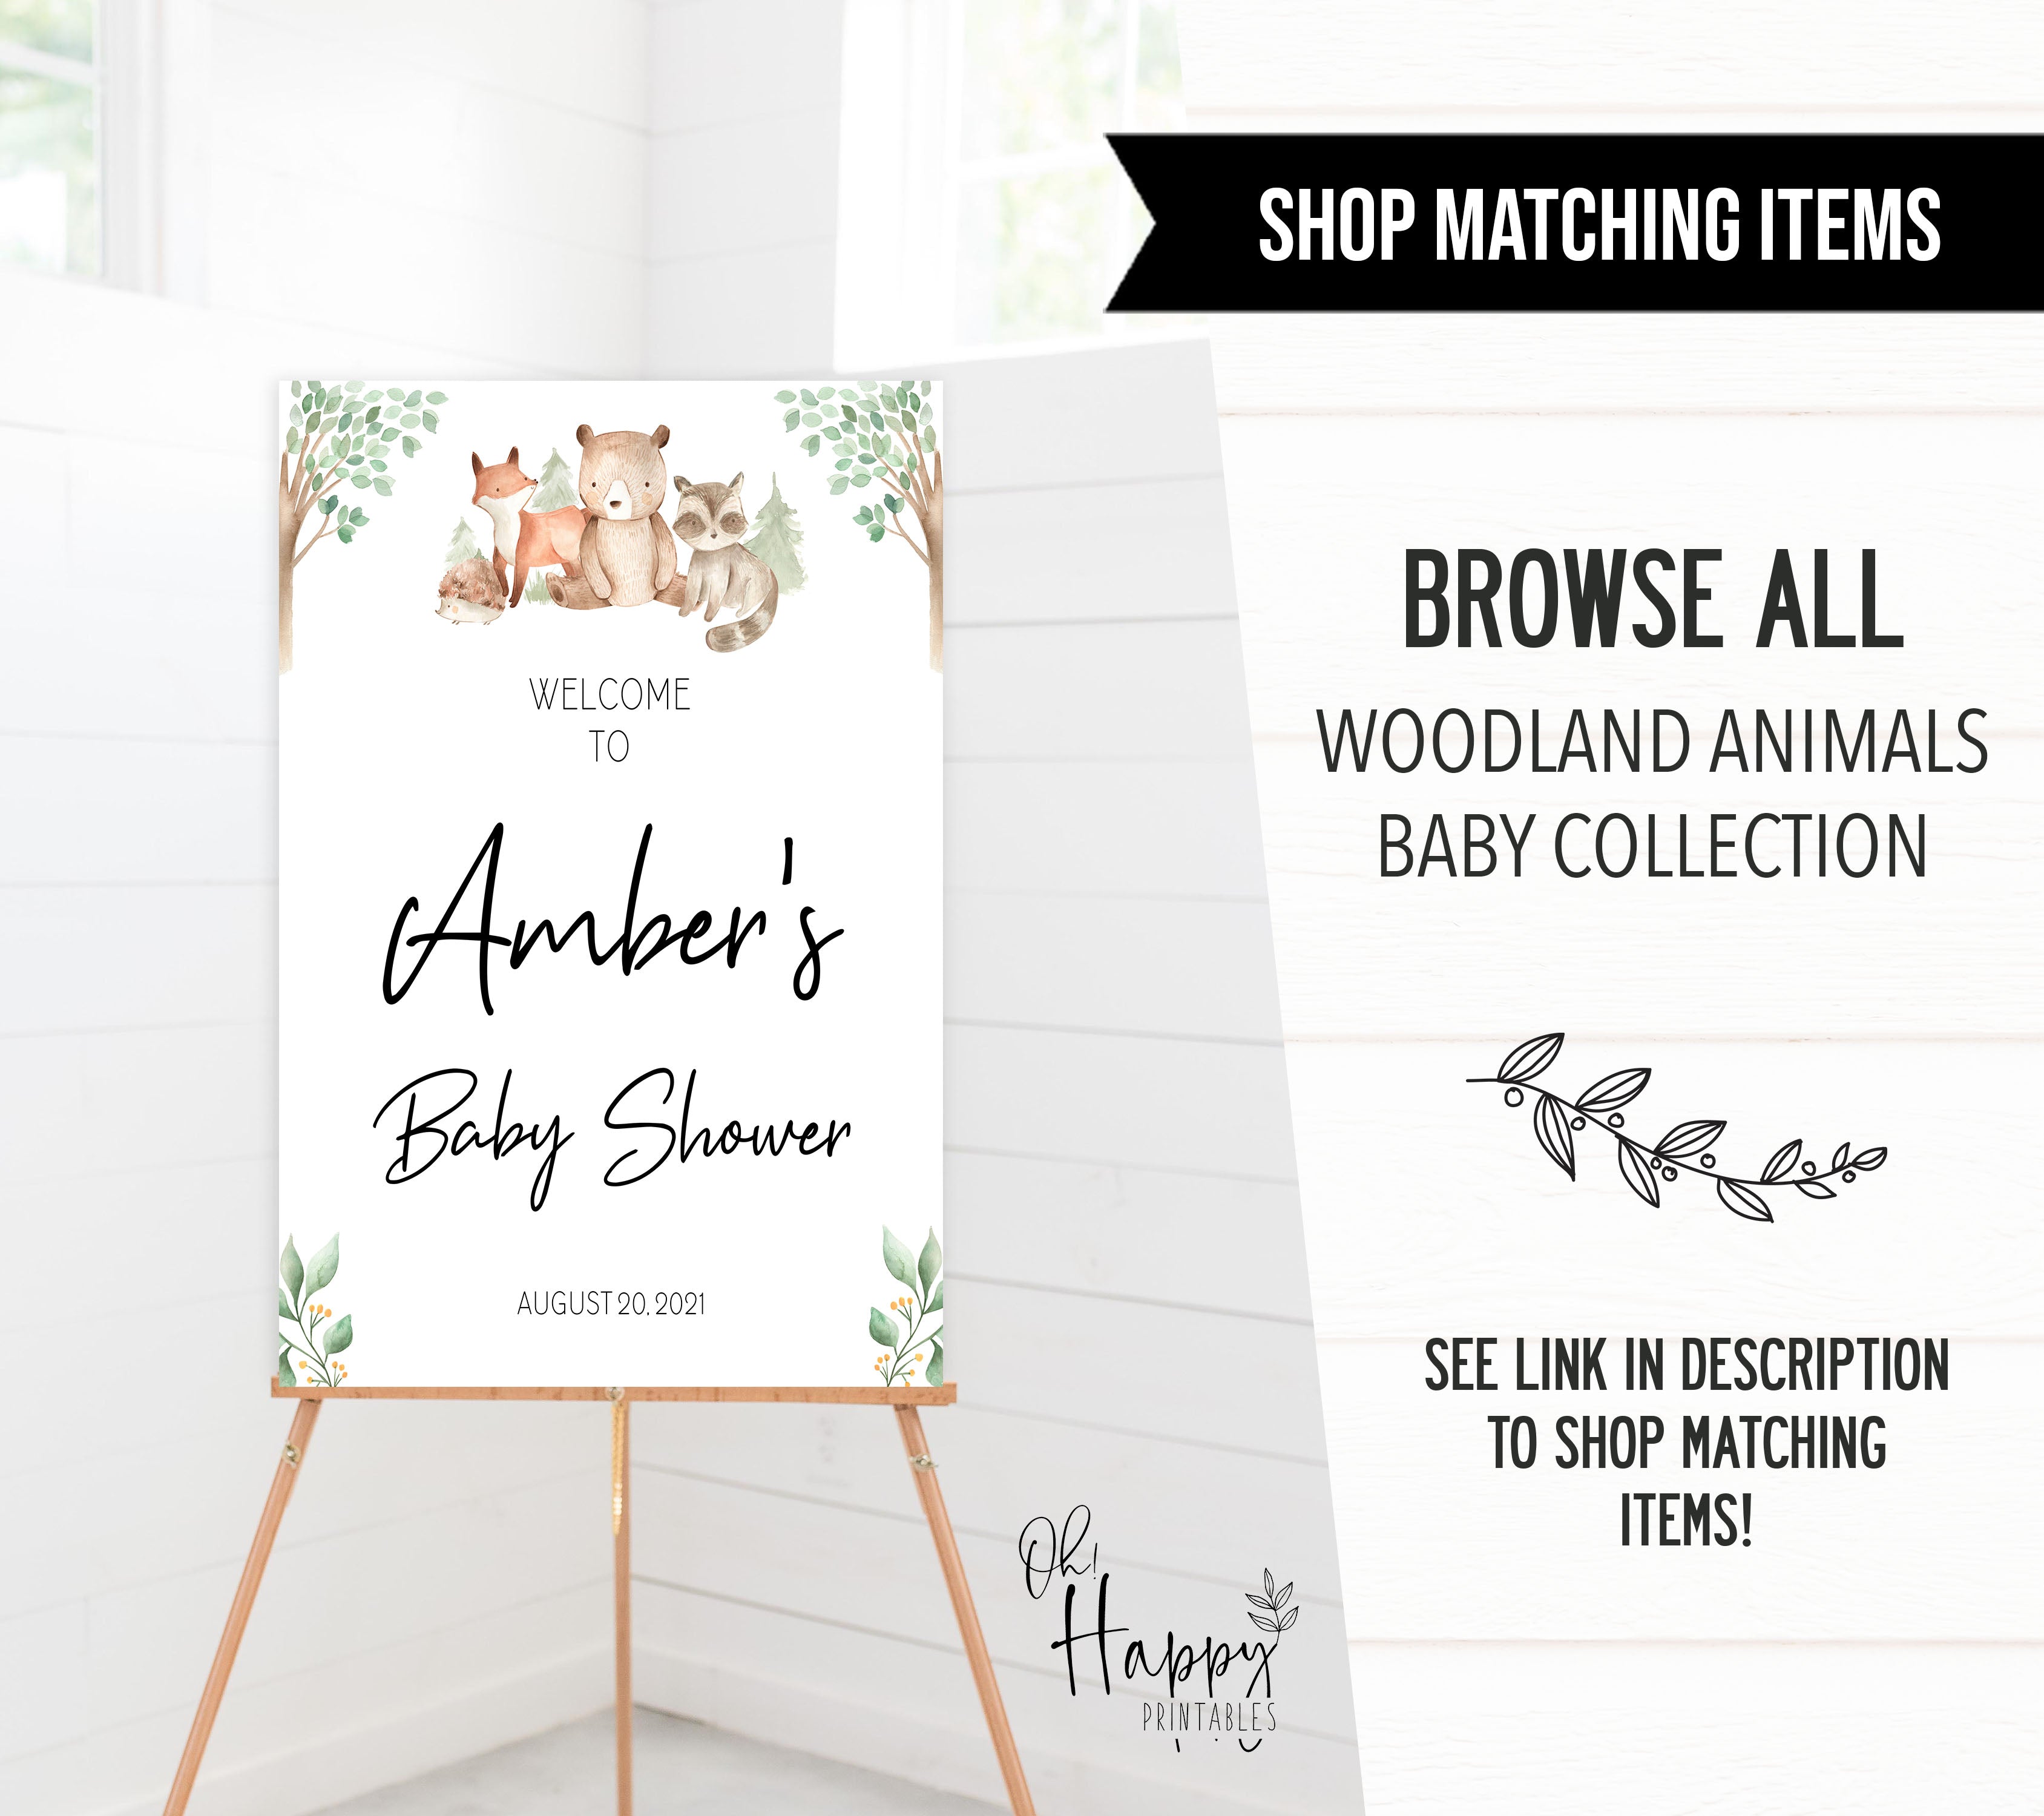 how big is mommys belly game, Printable baby shower games, woodland animals baby games, baby shower games, fun baby shower ideas, top baby shower ideas, woodland baby shower, baby shower games, fun woodland animals baby shower ideas